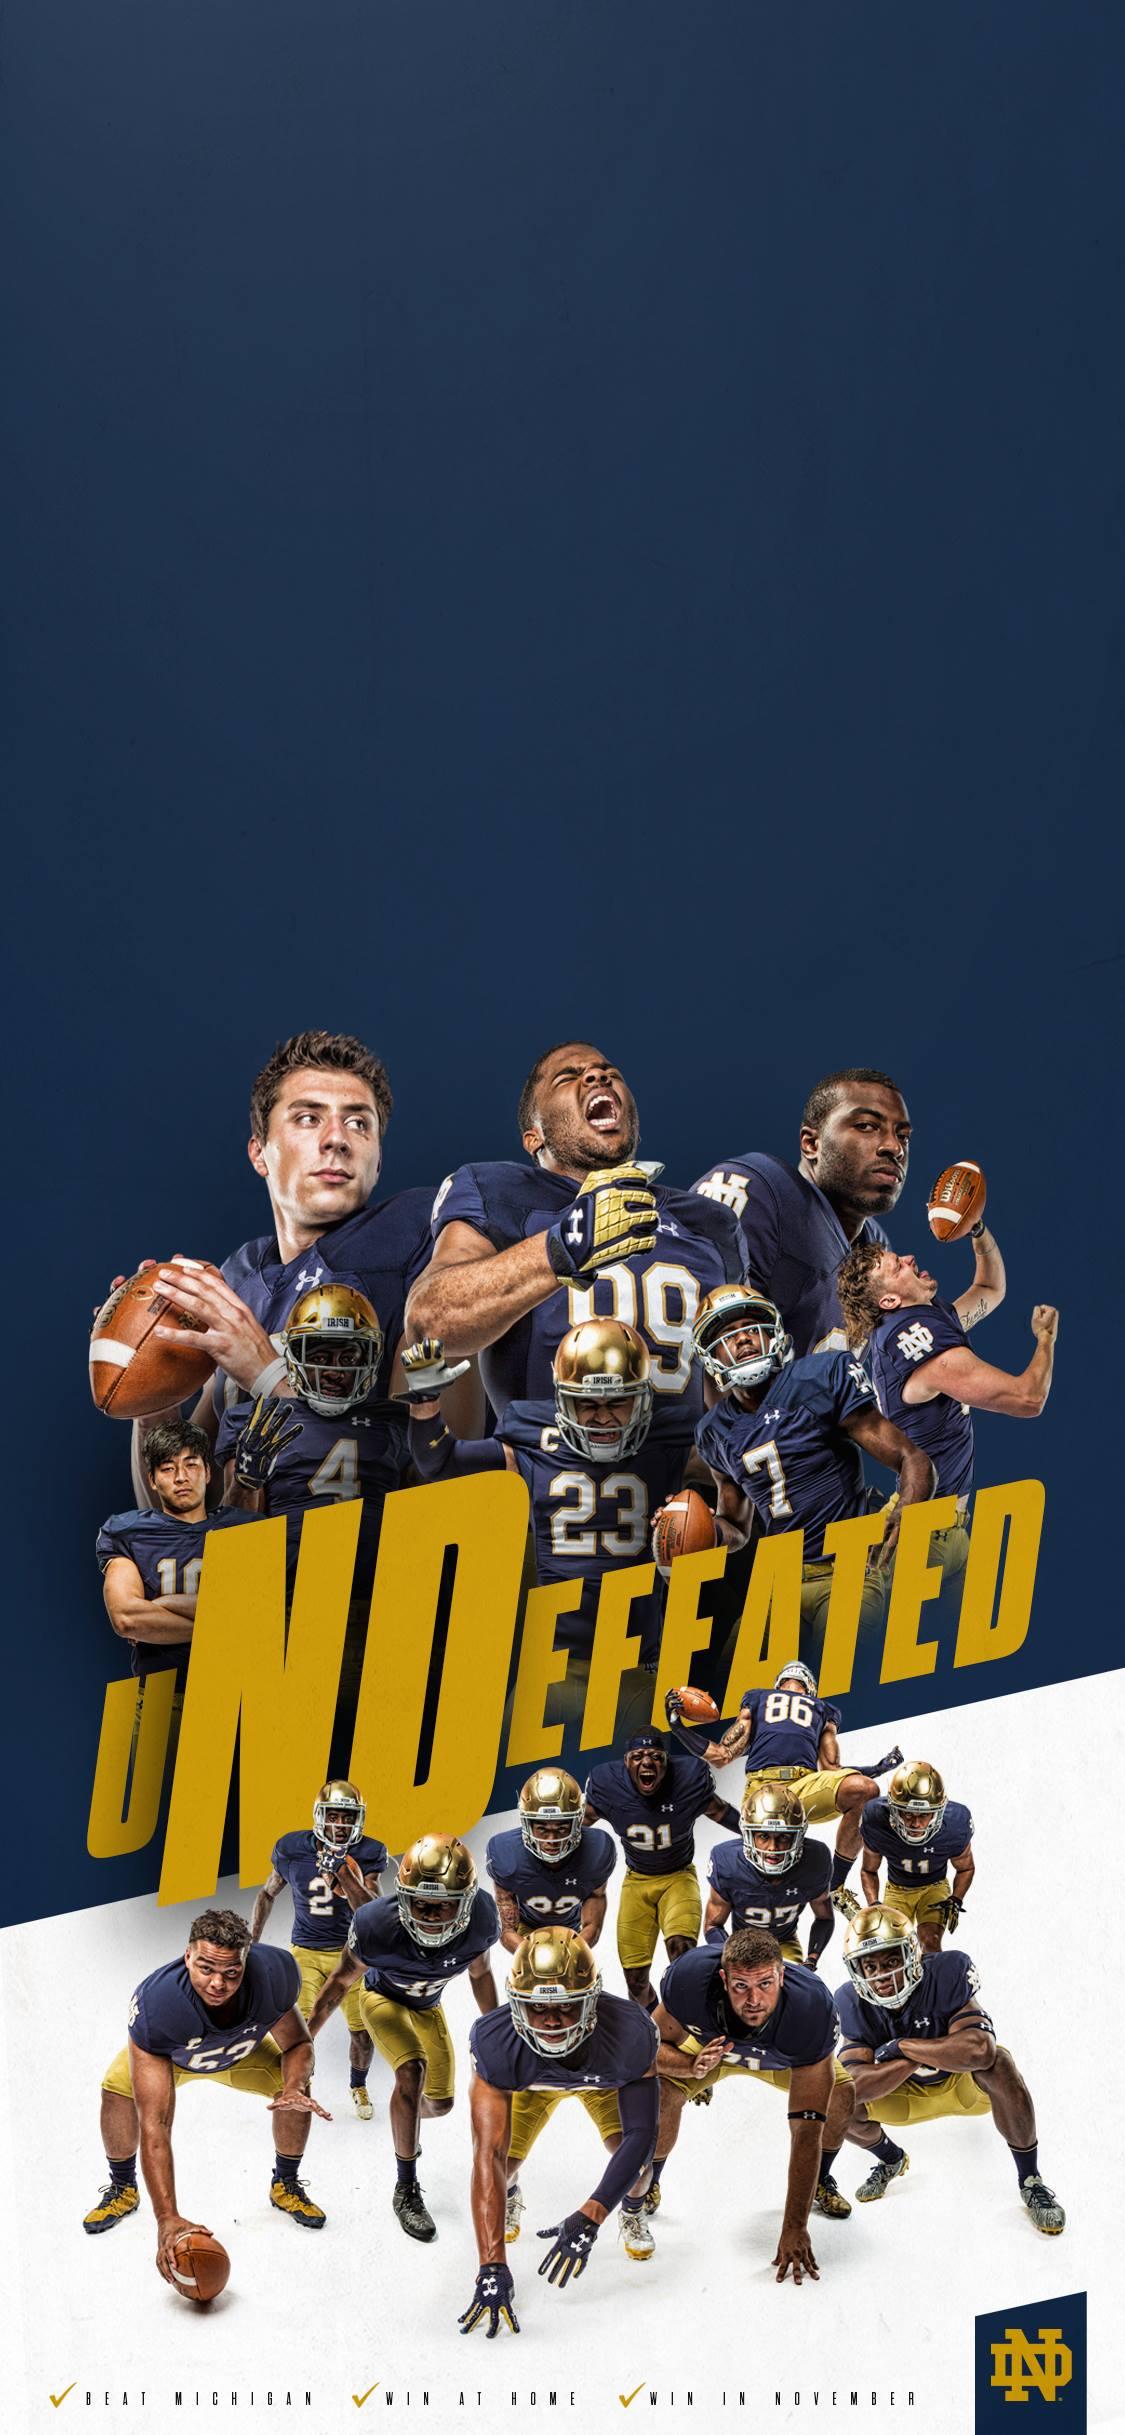 Wallpaper Wednesday Undefeated Notre Dame Football